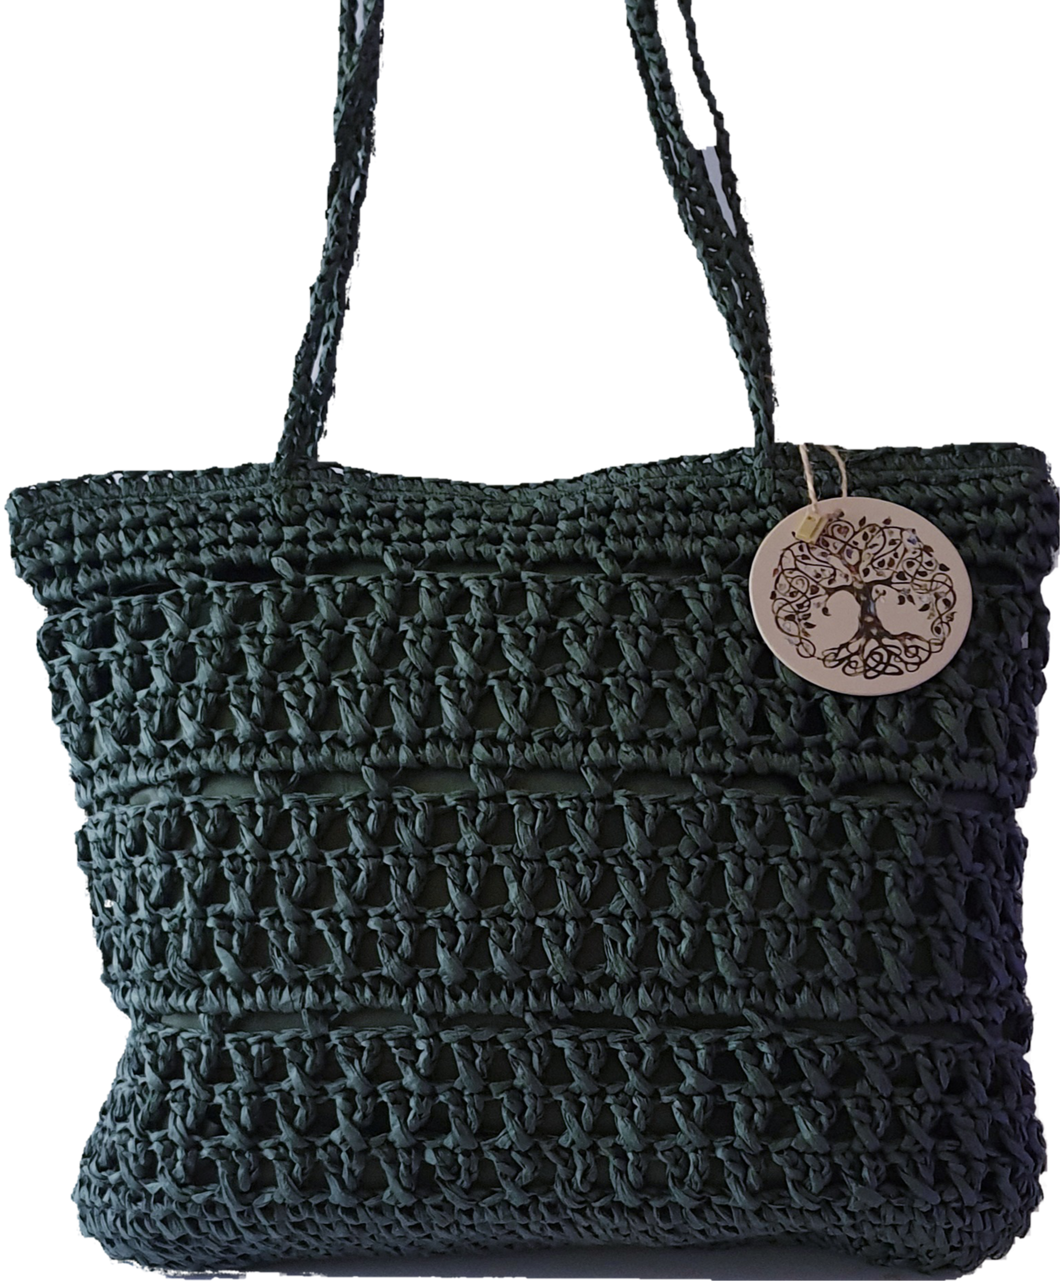 Forest Green Straw Tote Bag